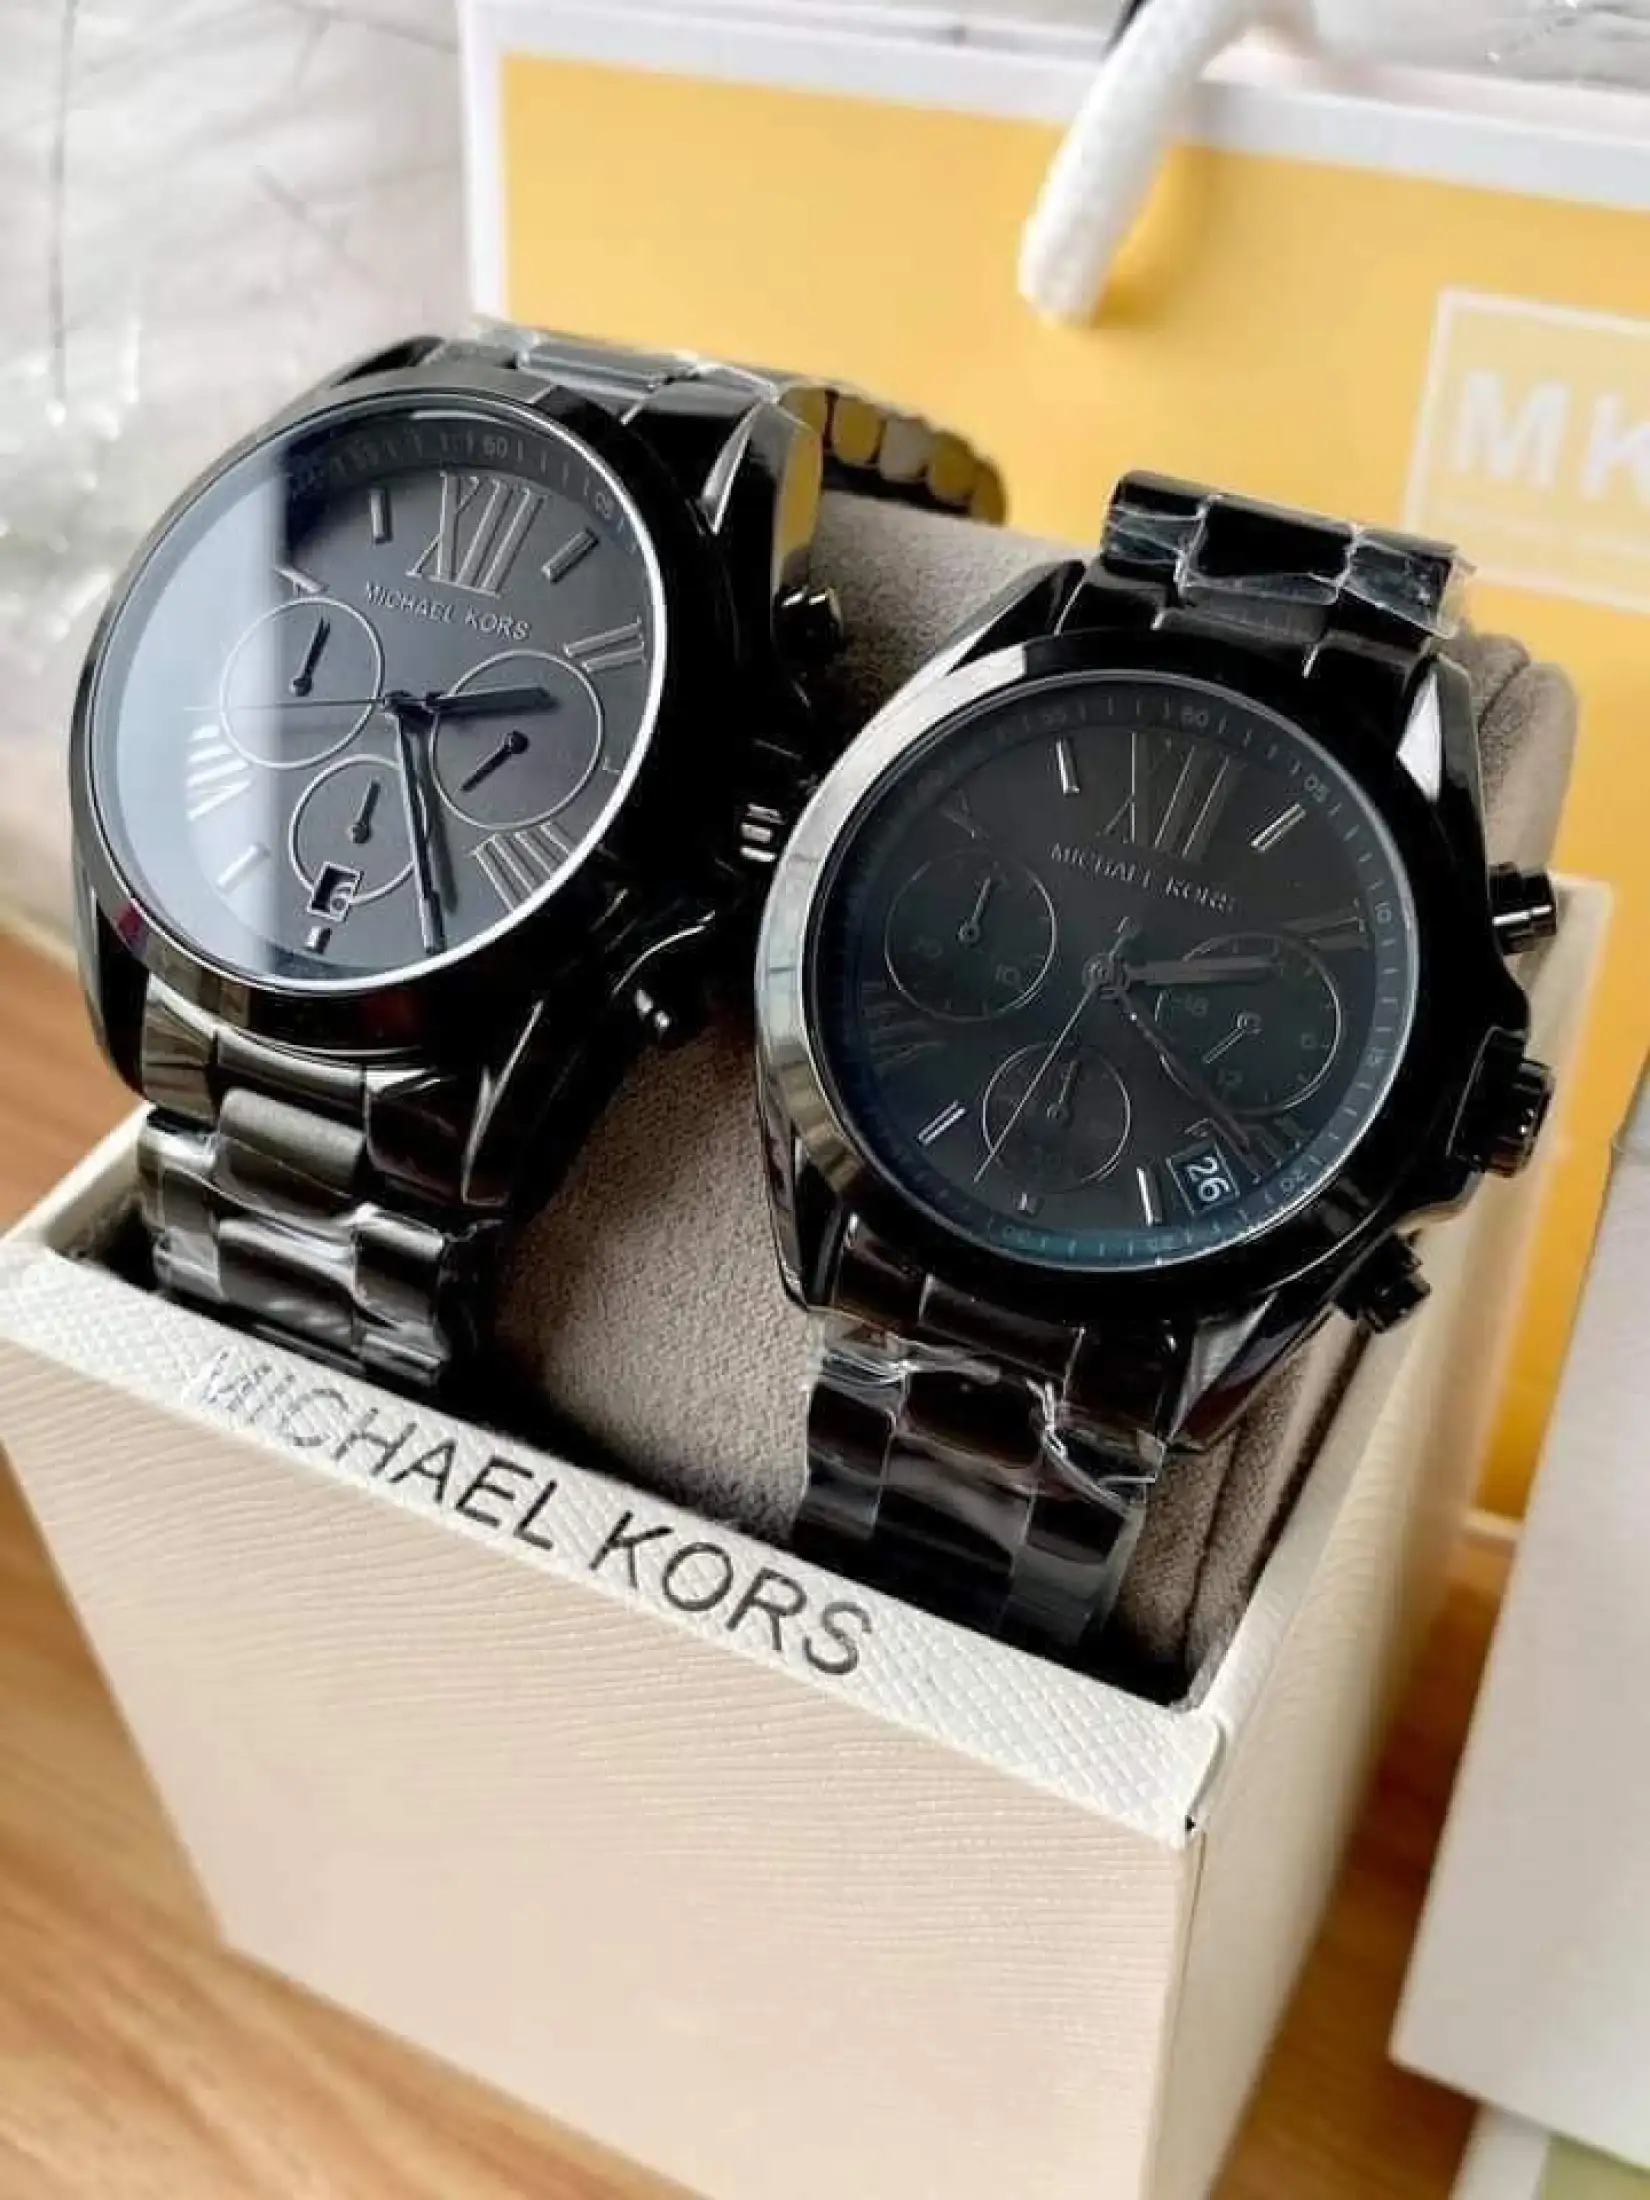 Tekpinoy - Black Women's Mk Bradshaw Authentic and Pawnable Michael Kors watch - Men's Watch OR Women's watch for Formal or Casual Lowest Price Stainless | Lazada PH